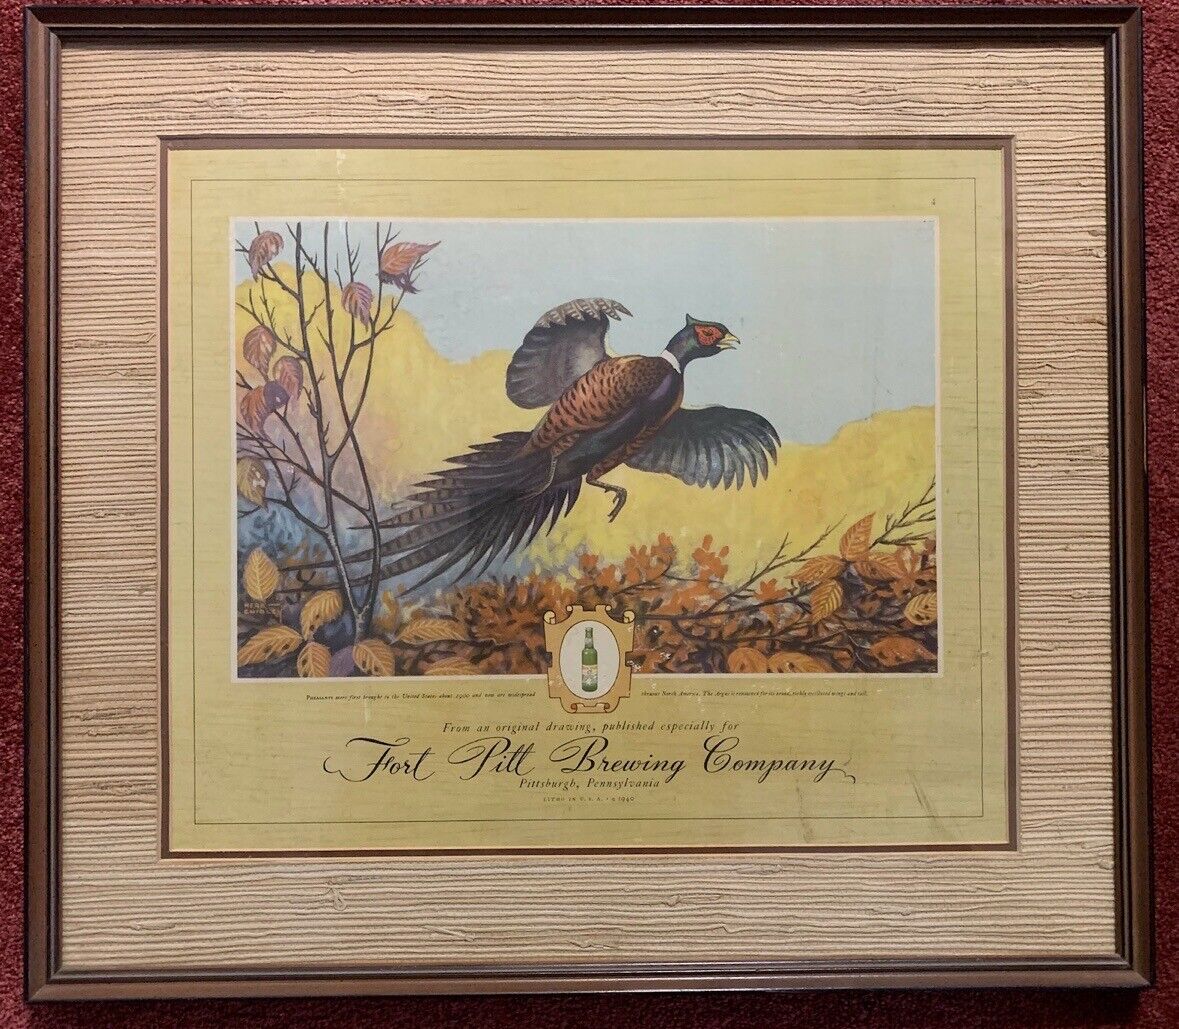 Fort Pitt Brewing Company Advertising Lithograph 1940- Framed